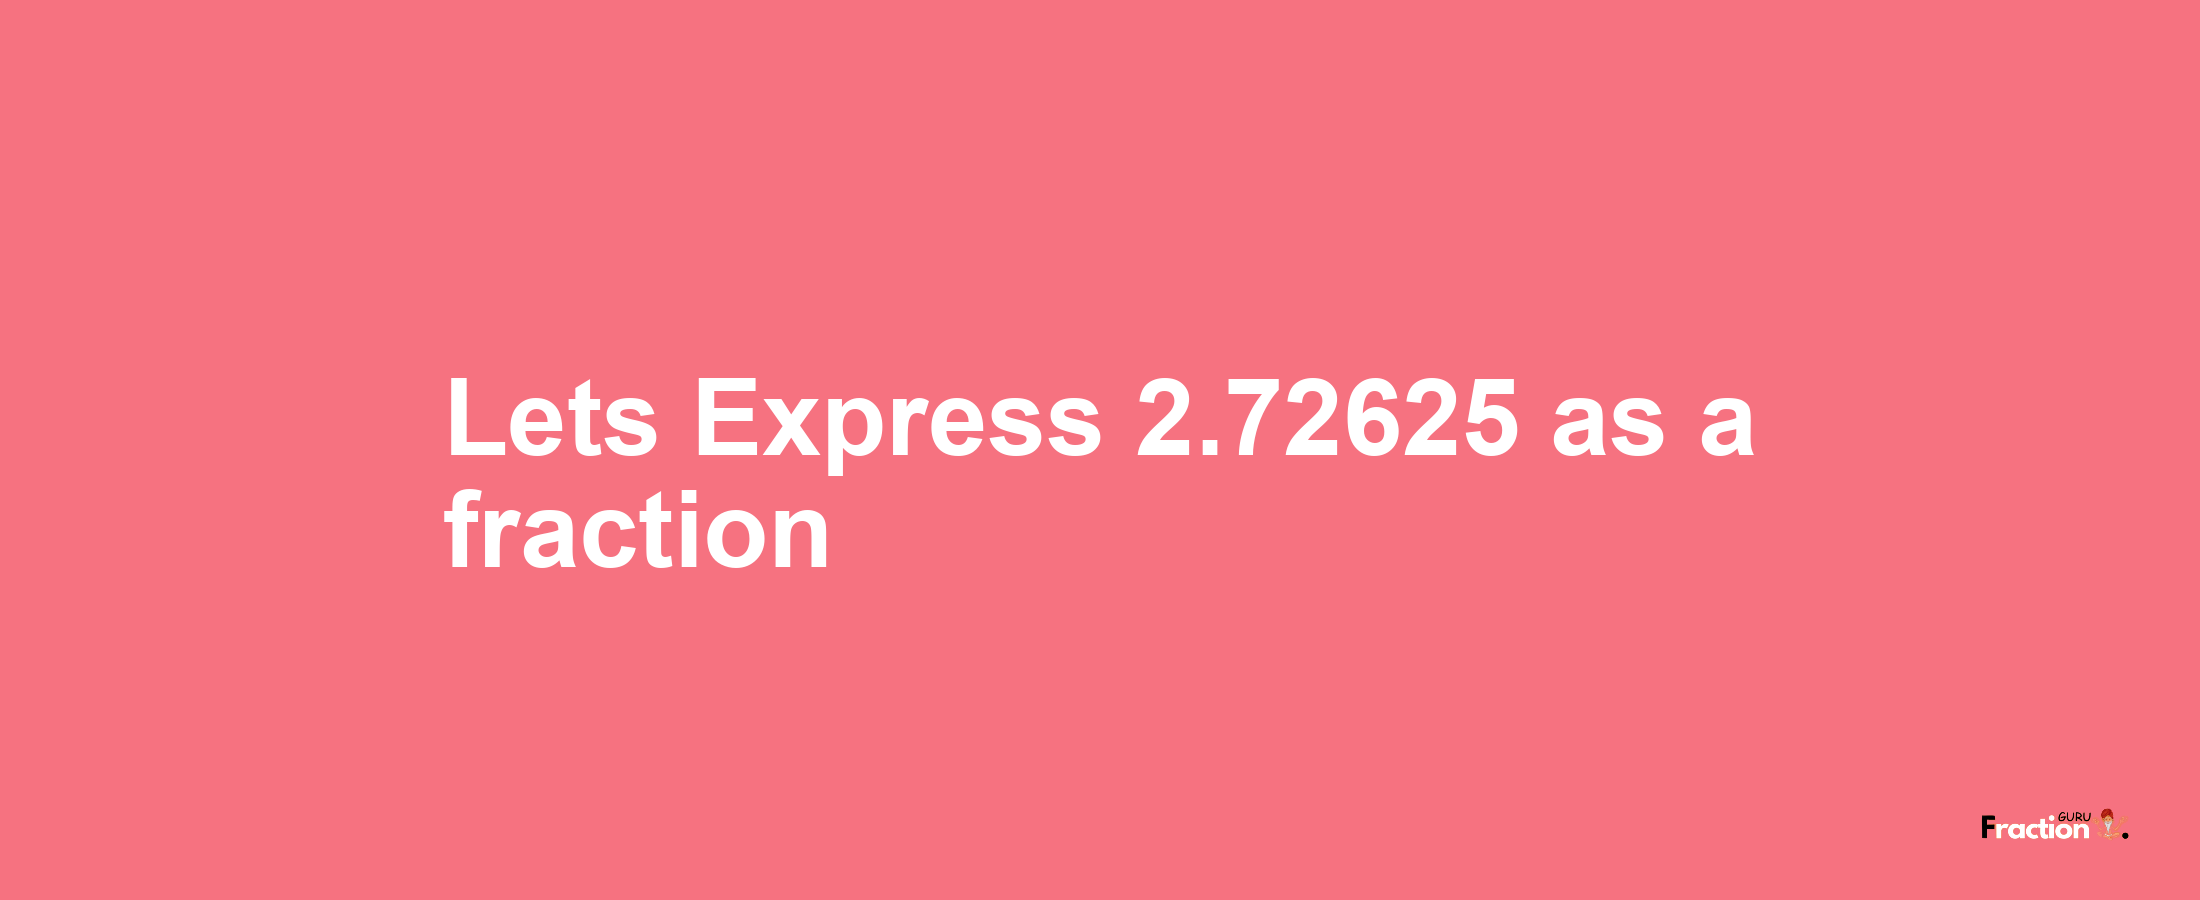 Lets Express 2.72625 as afraction